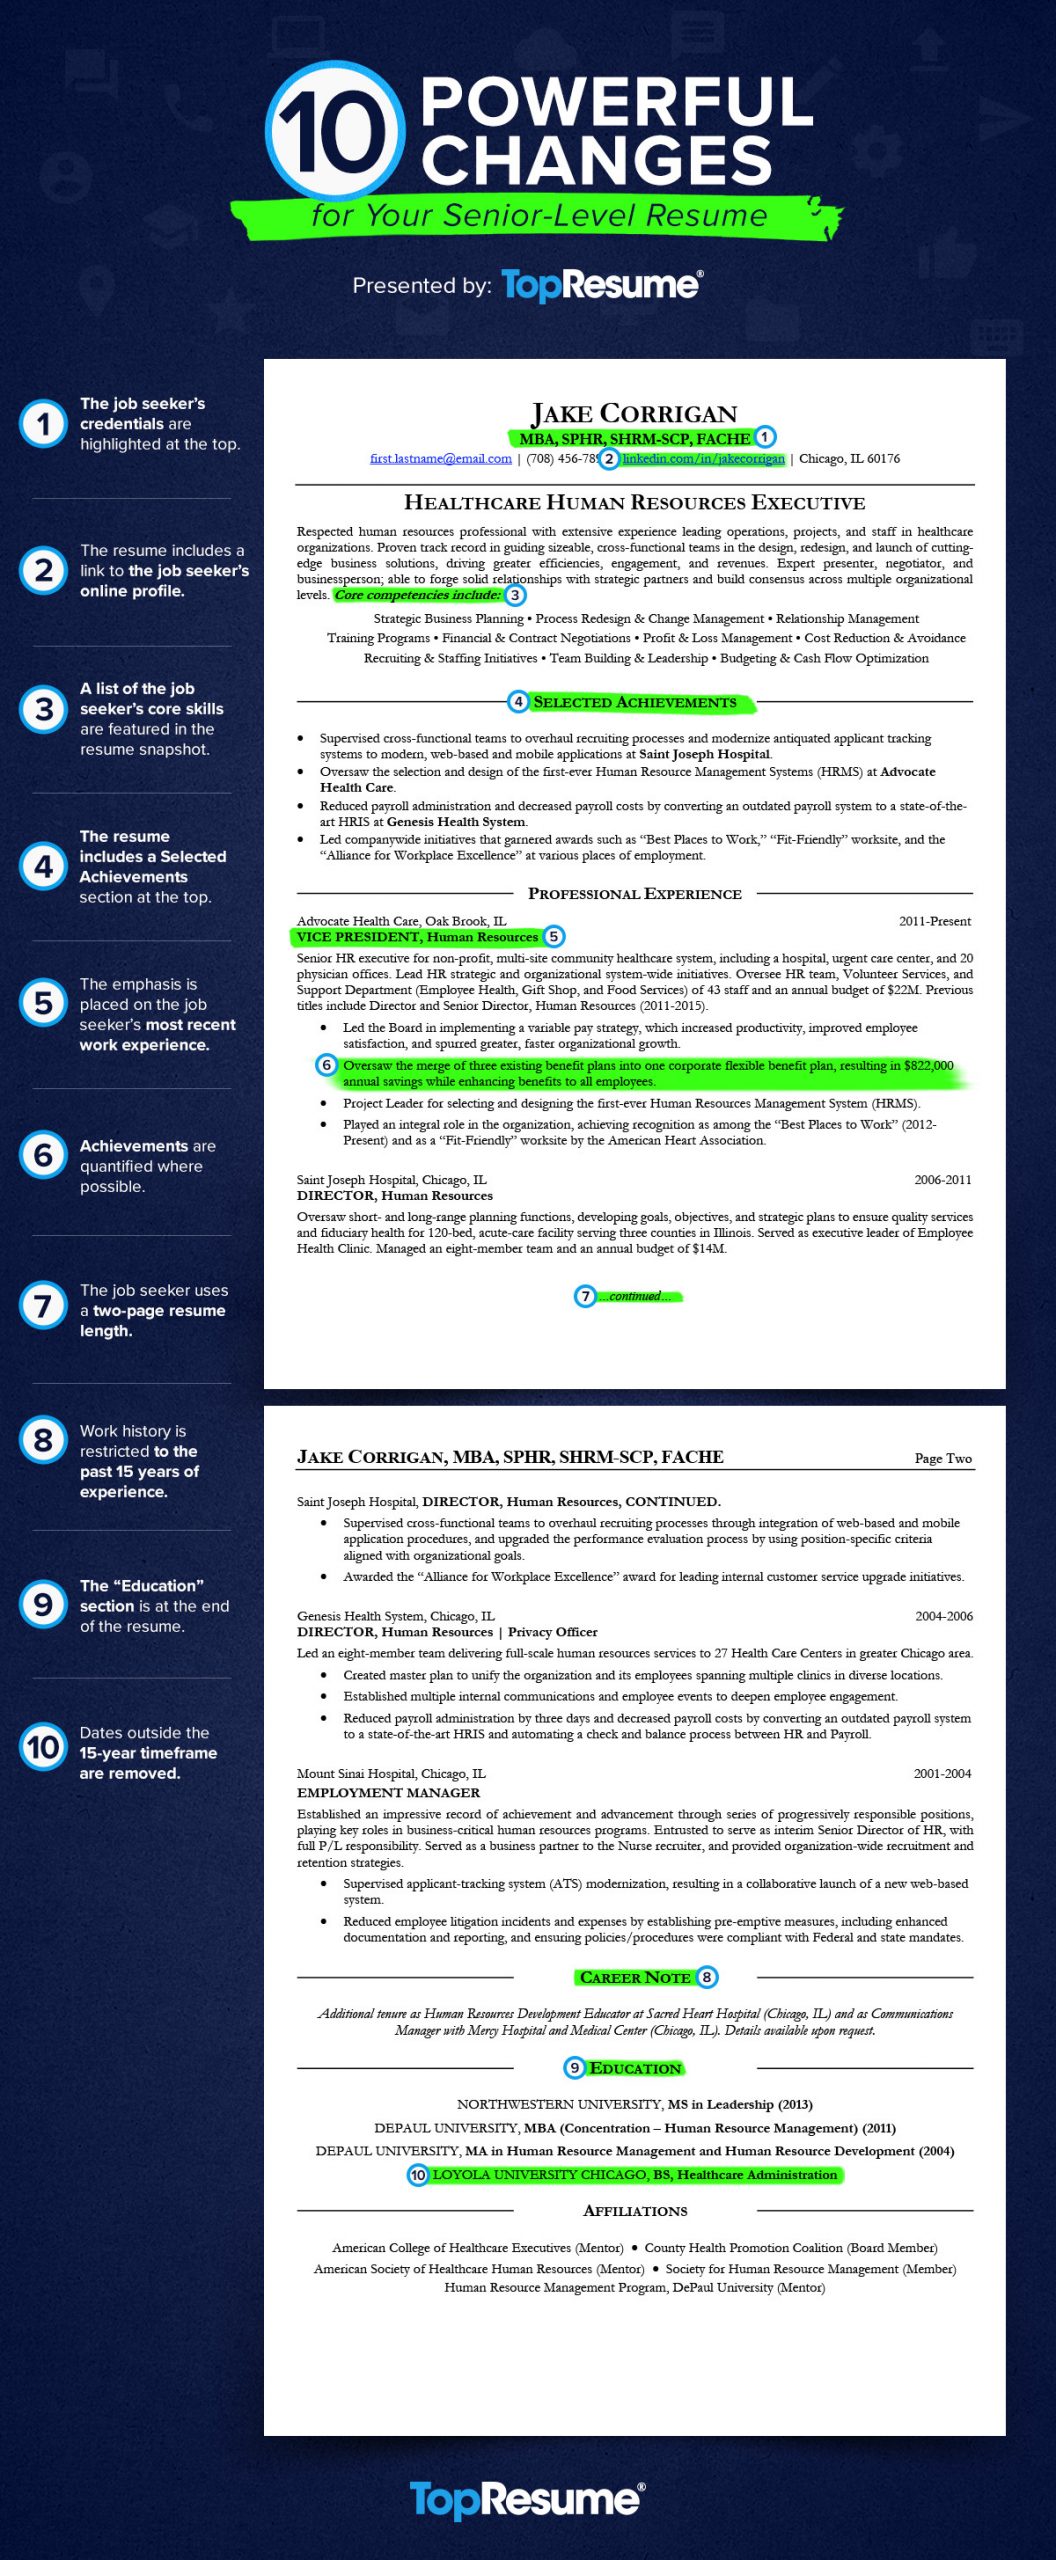 Sample Resume for Senior Management Position 10 Powerful Changes for Your Executive-level Resume topresume